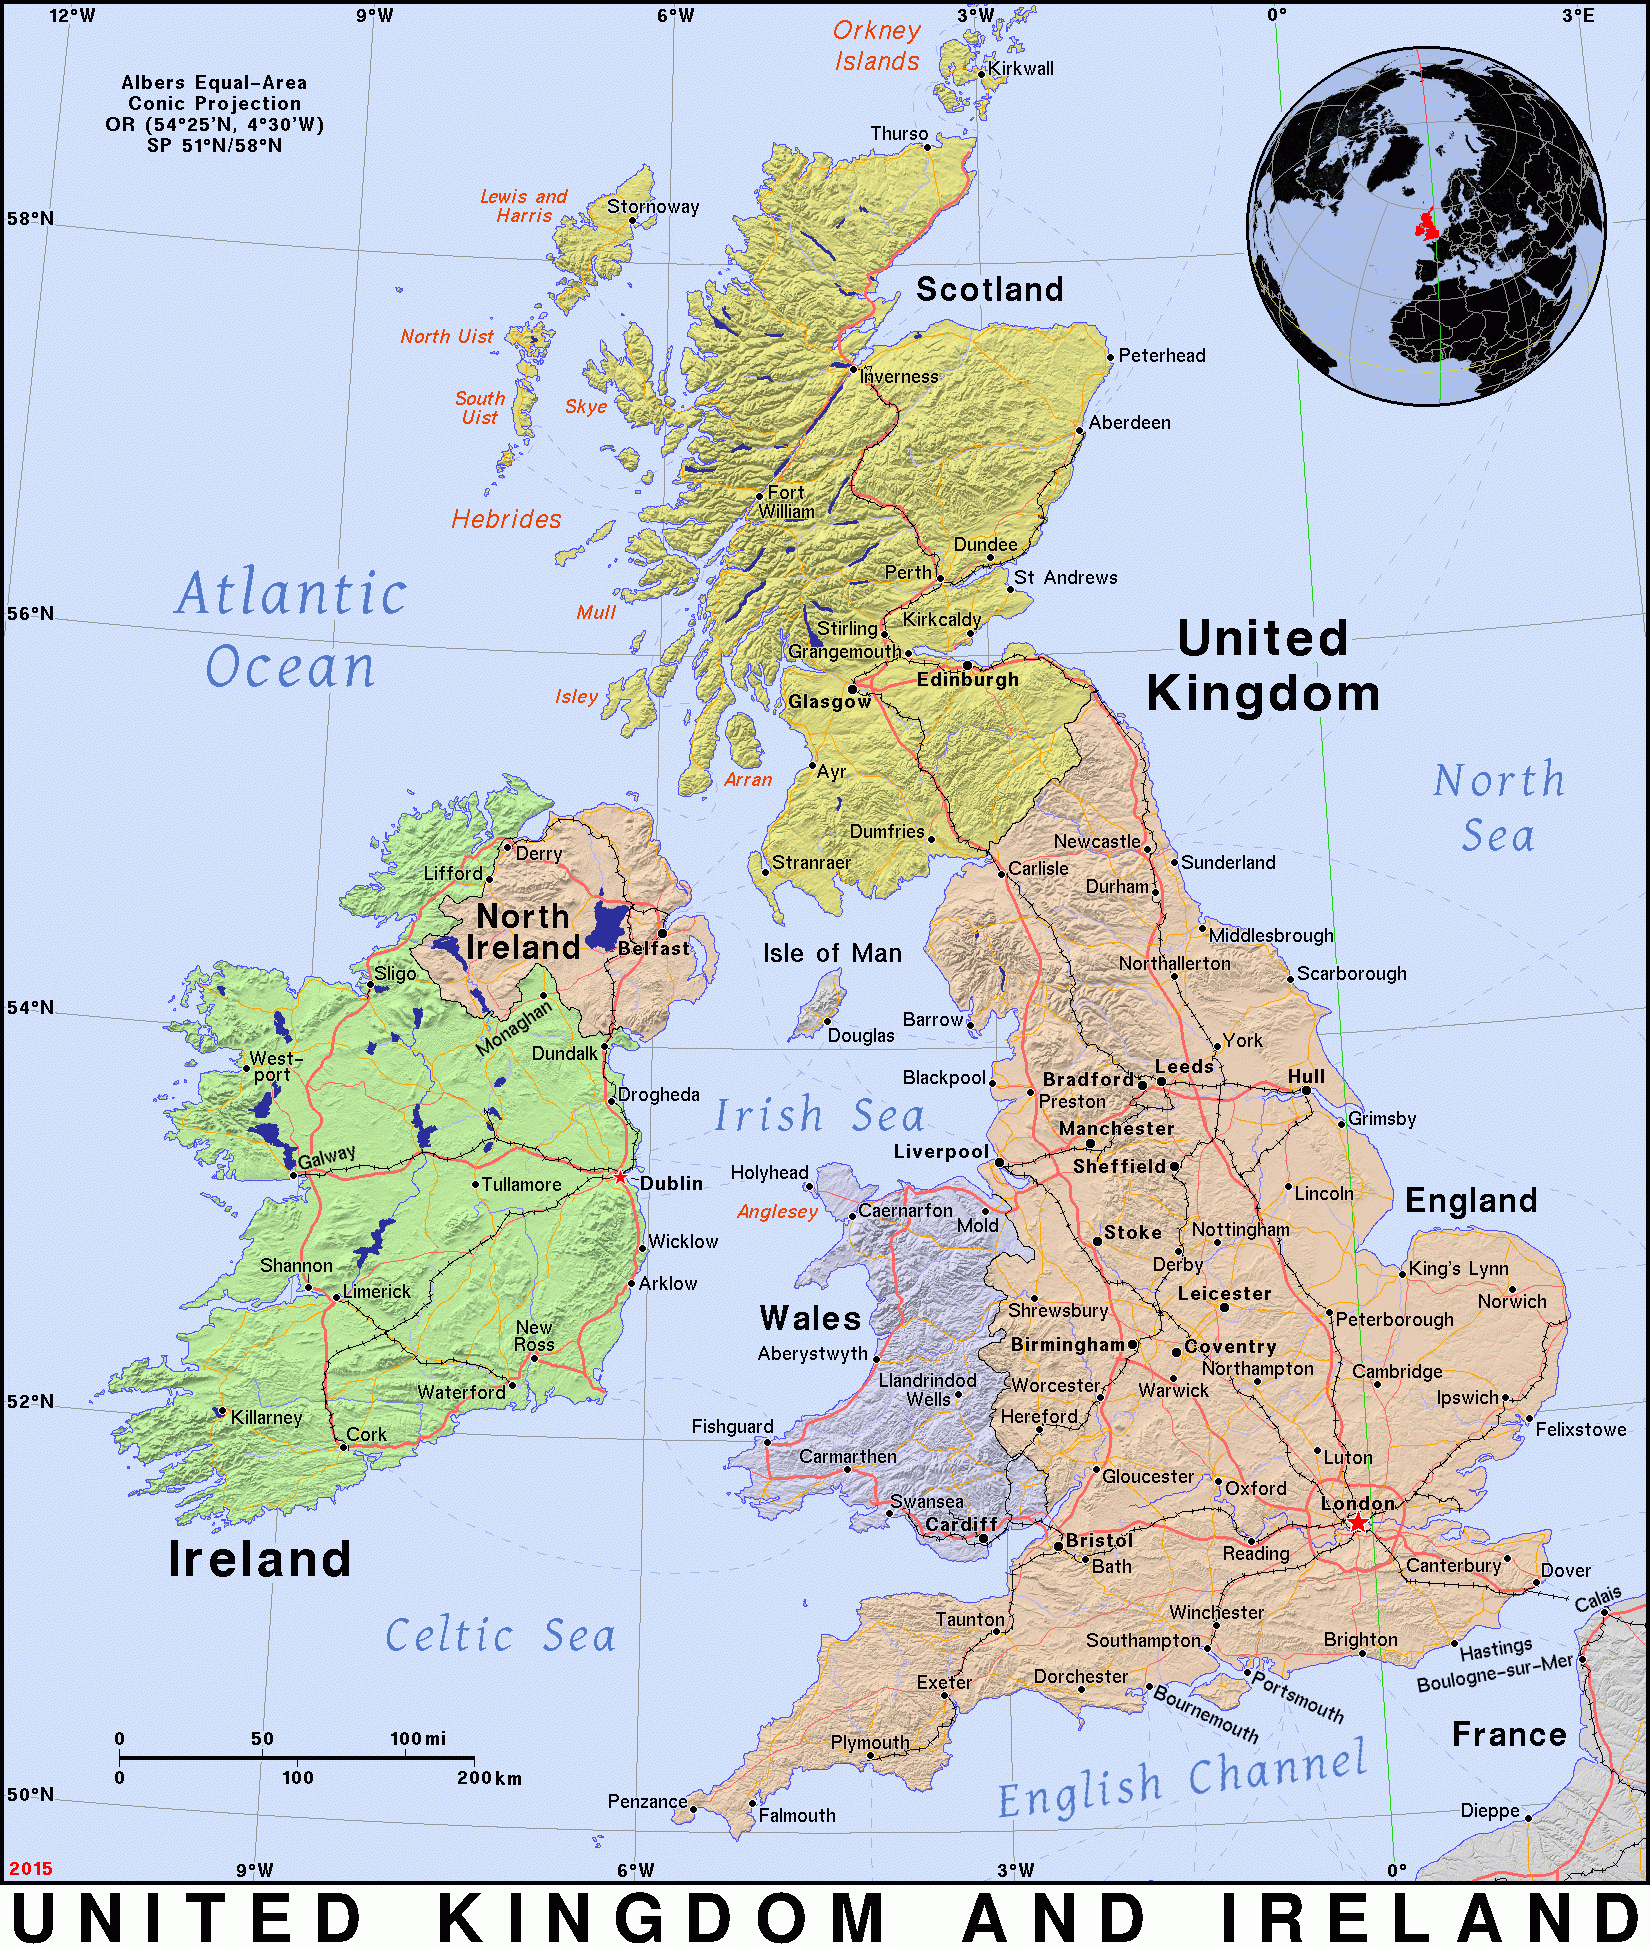 United Kingdom And Ireland Public Domain Maps By PAT The Free Open 